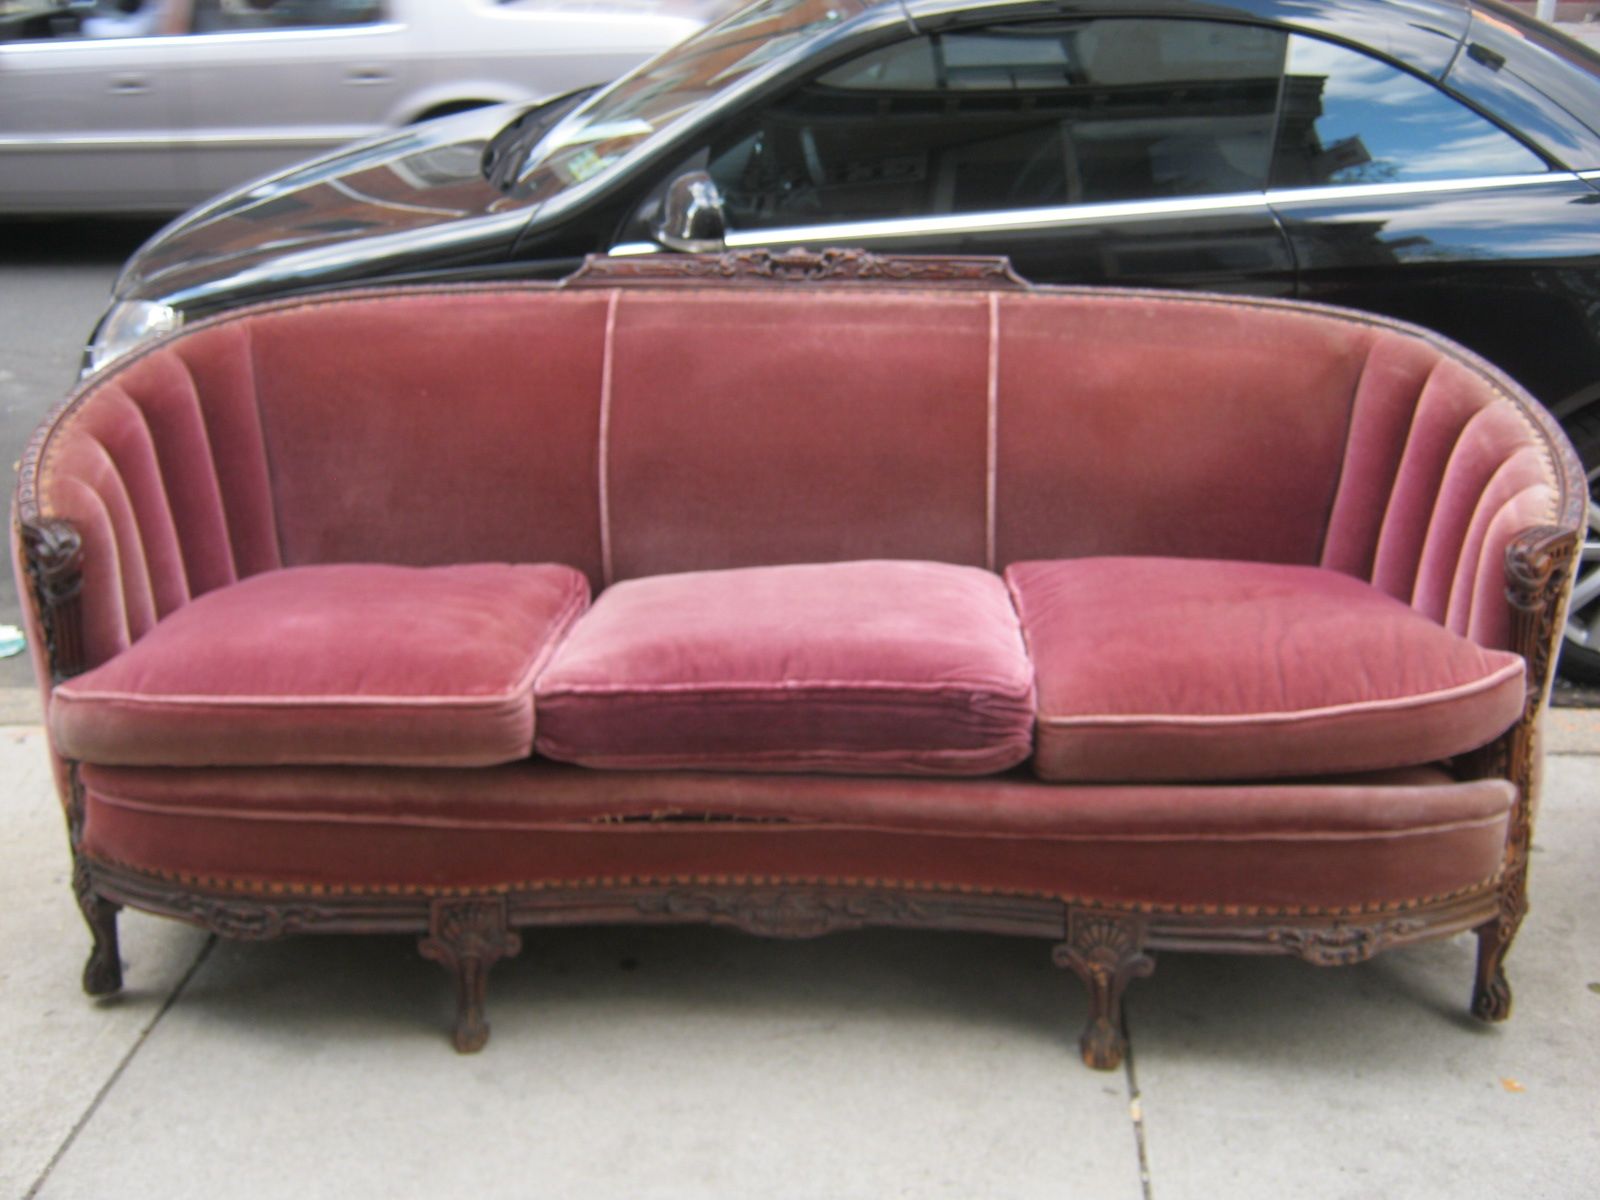 Uhuru Furniture Collectibles Victorian Sofa Sold Throughout 1930s Couch (View 12 of 15)